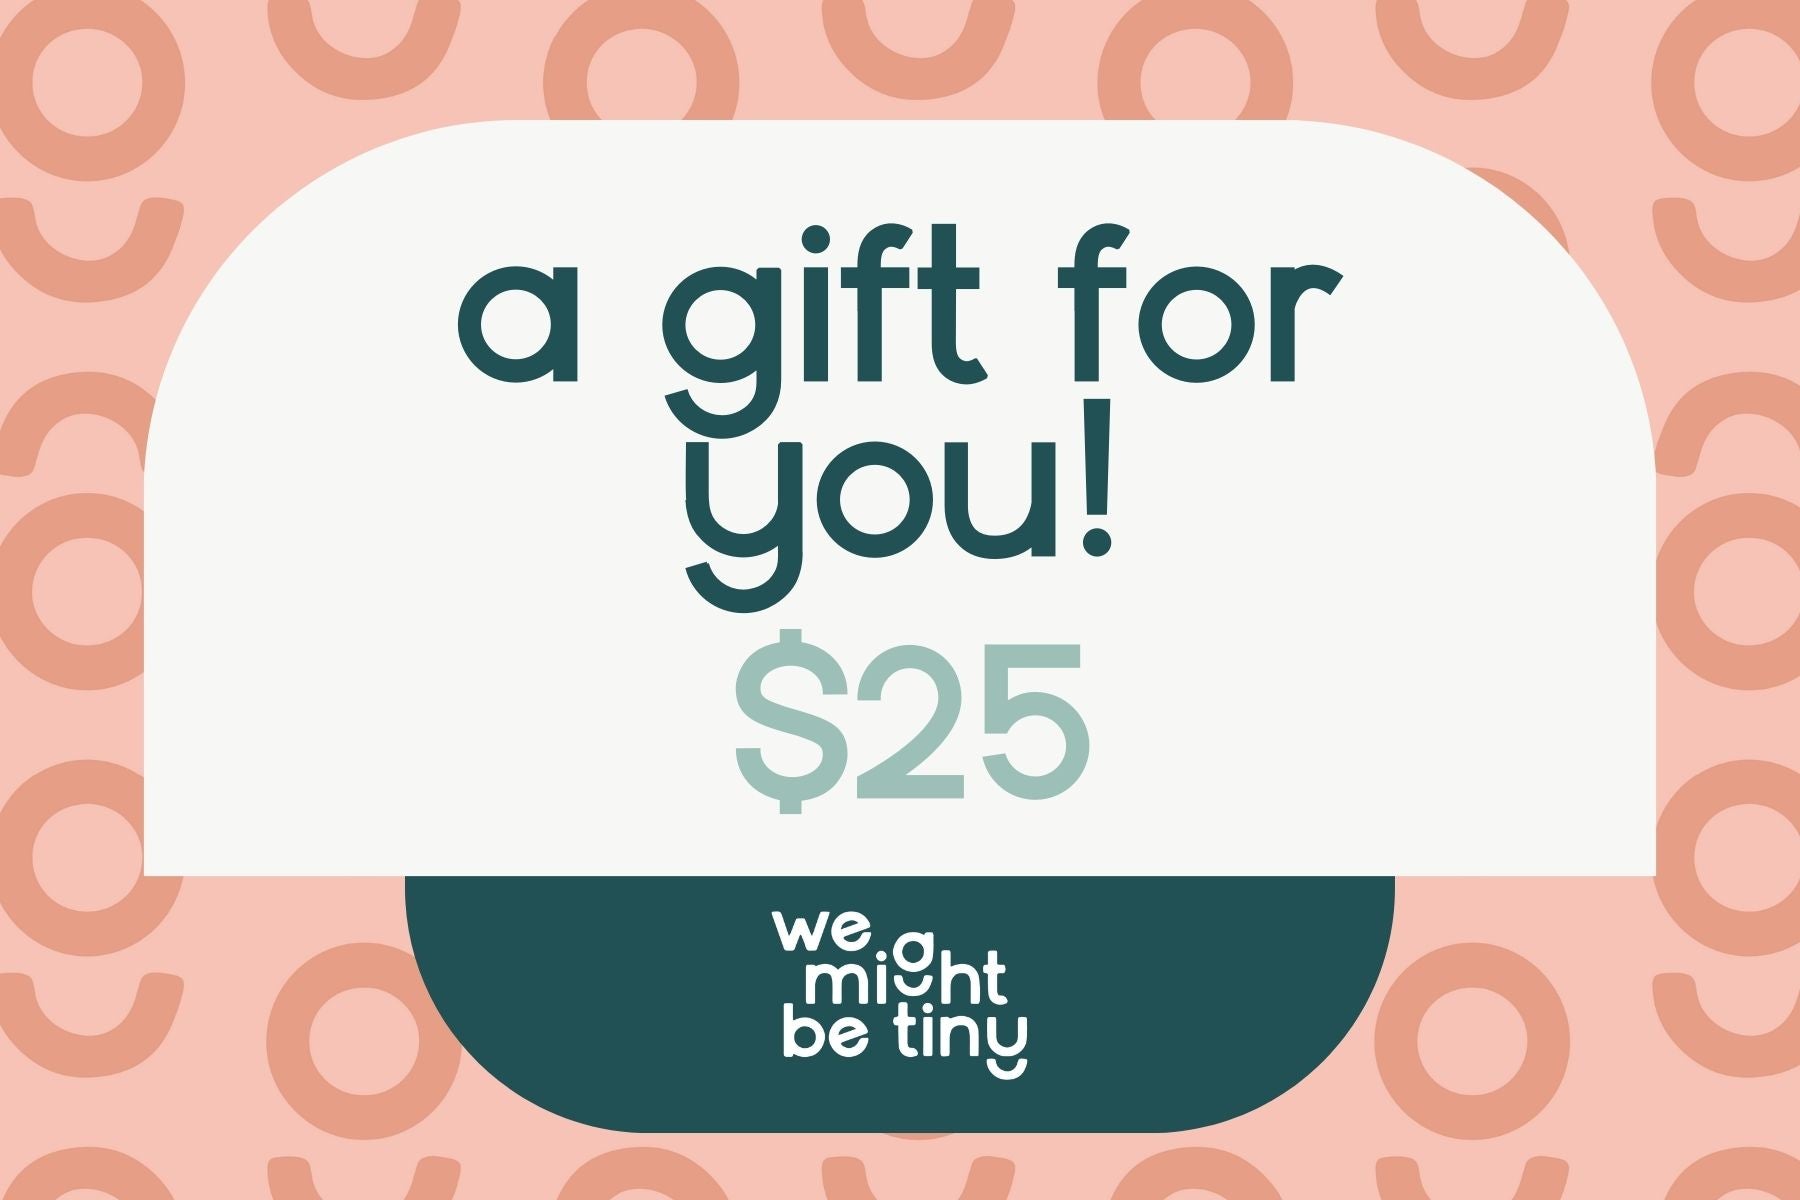 Gift Voucher - We Might Be Tiny $25